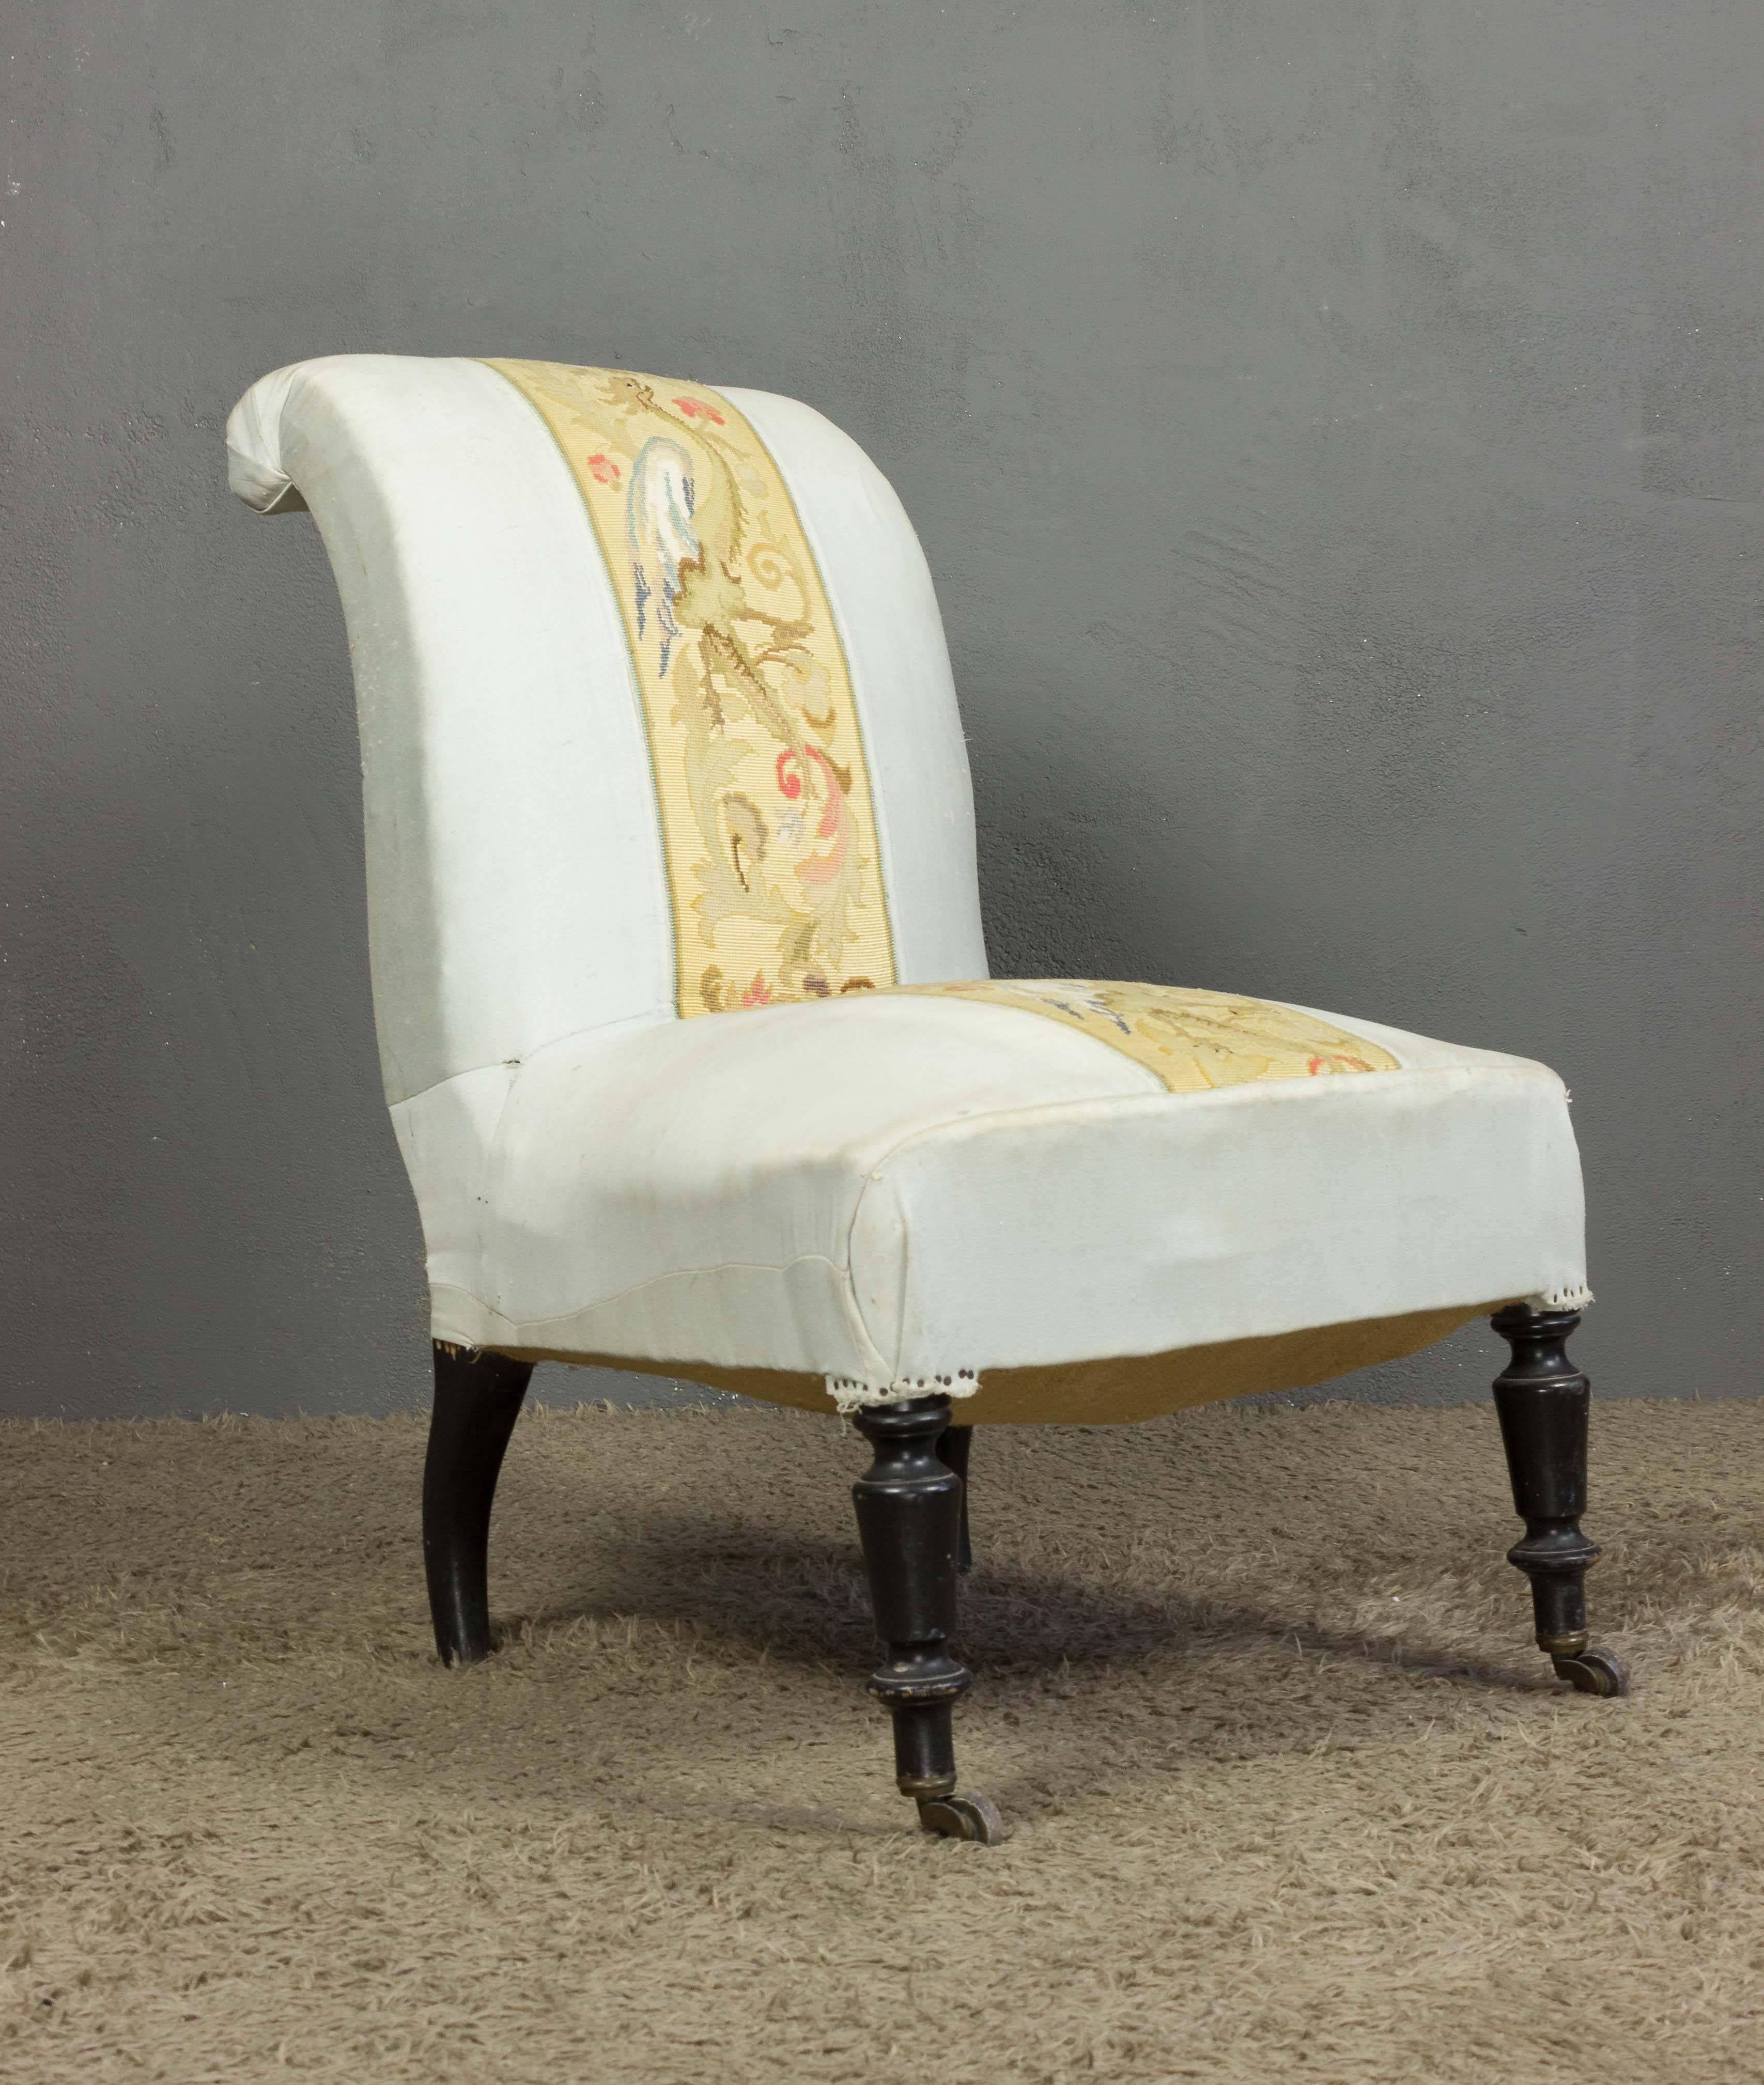 A lovely 19th century French Napoleon III slipper chair. This magnificent French slipper chair features a scrolled back, and has been upholstered in a light fabric, with an embroidered panel on the back and seat. In good vintage condition, this